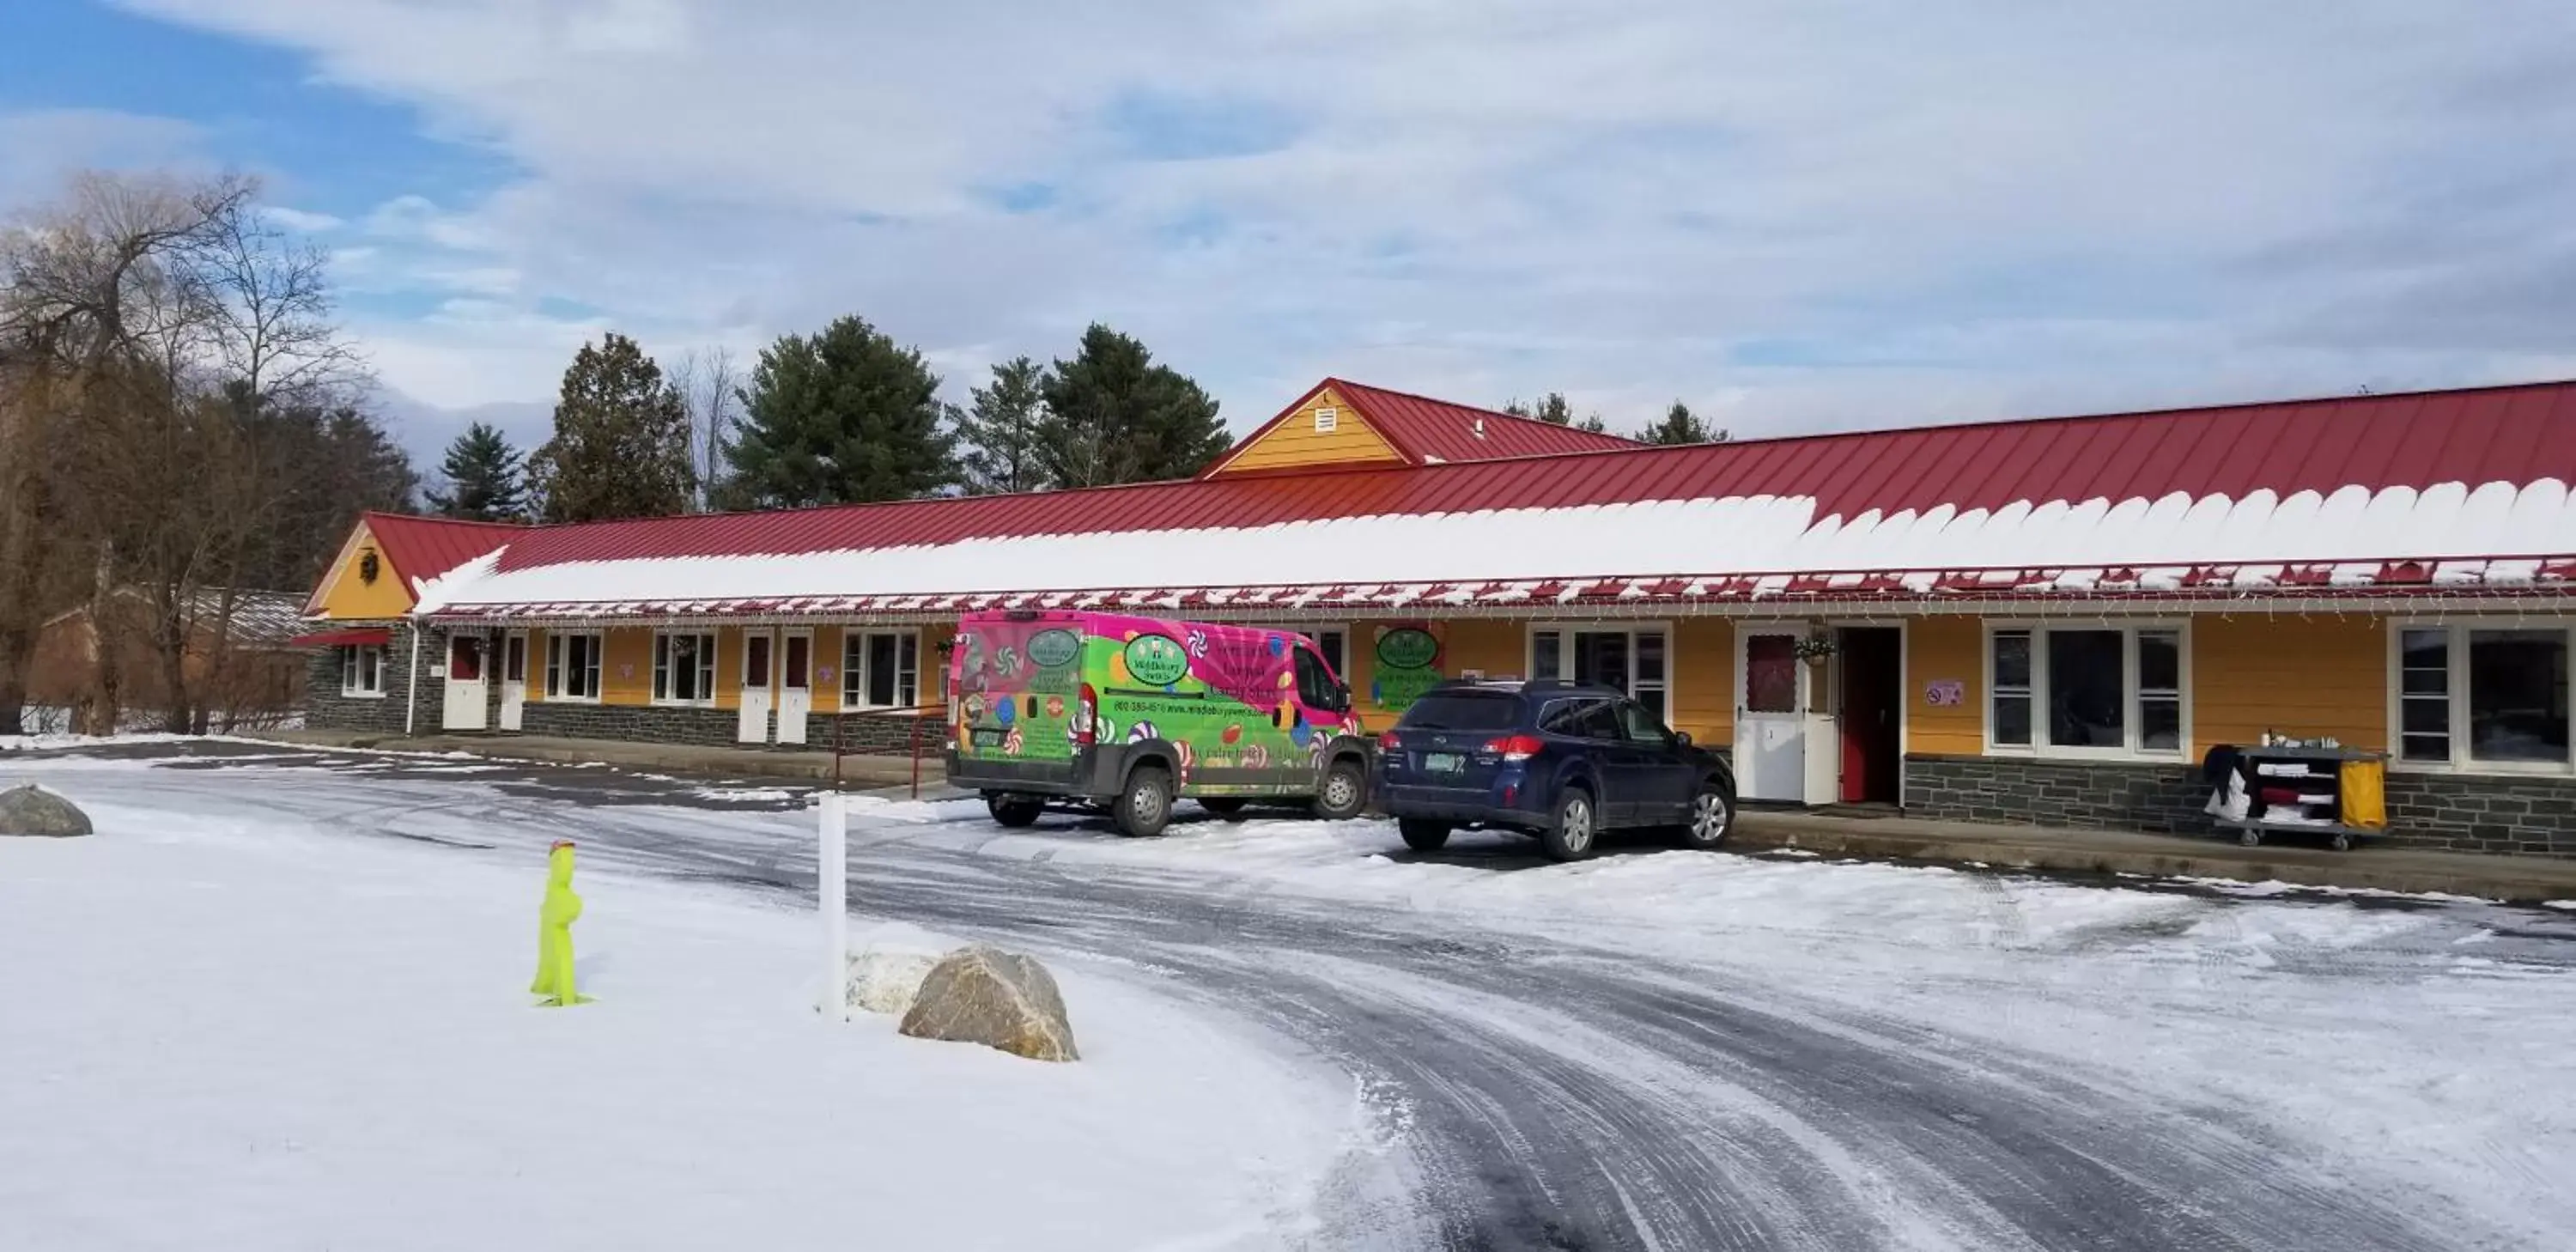 Winter in Middlebury Sweets Motel